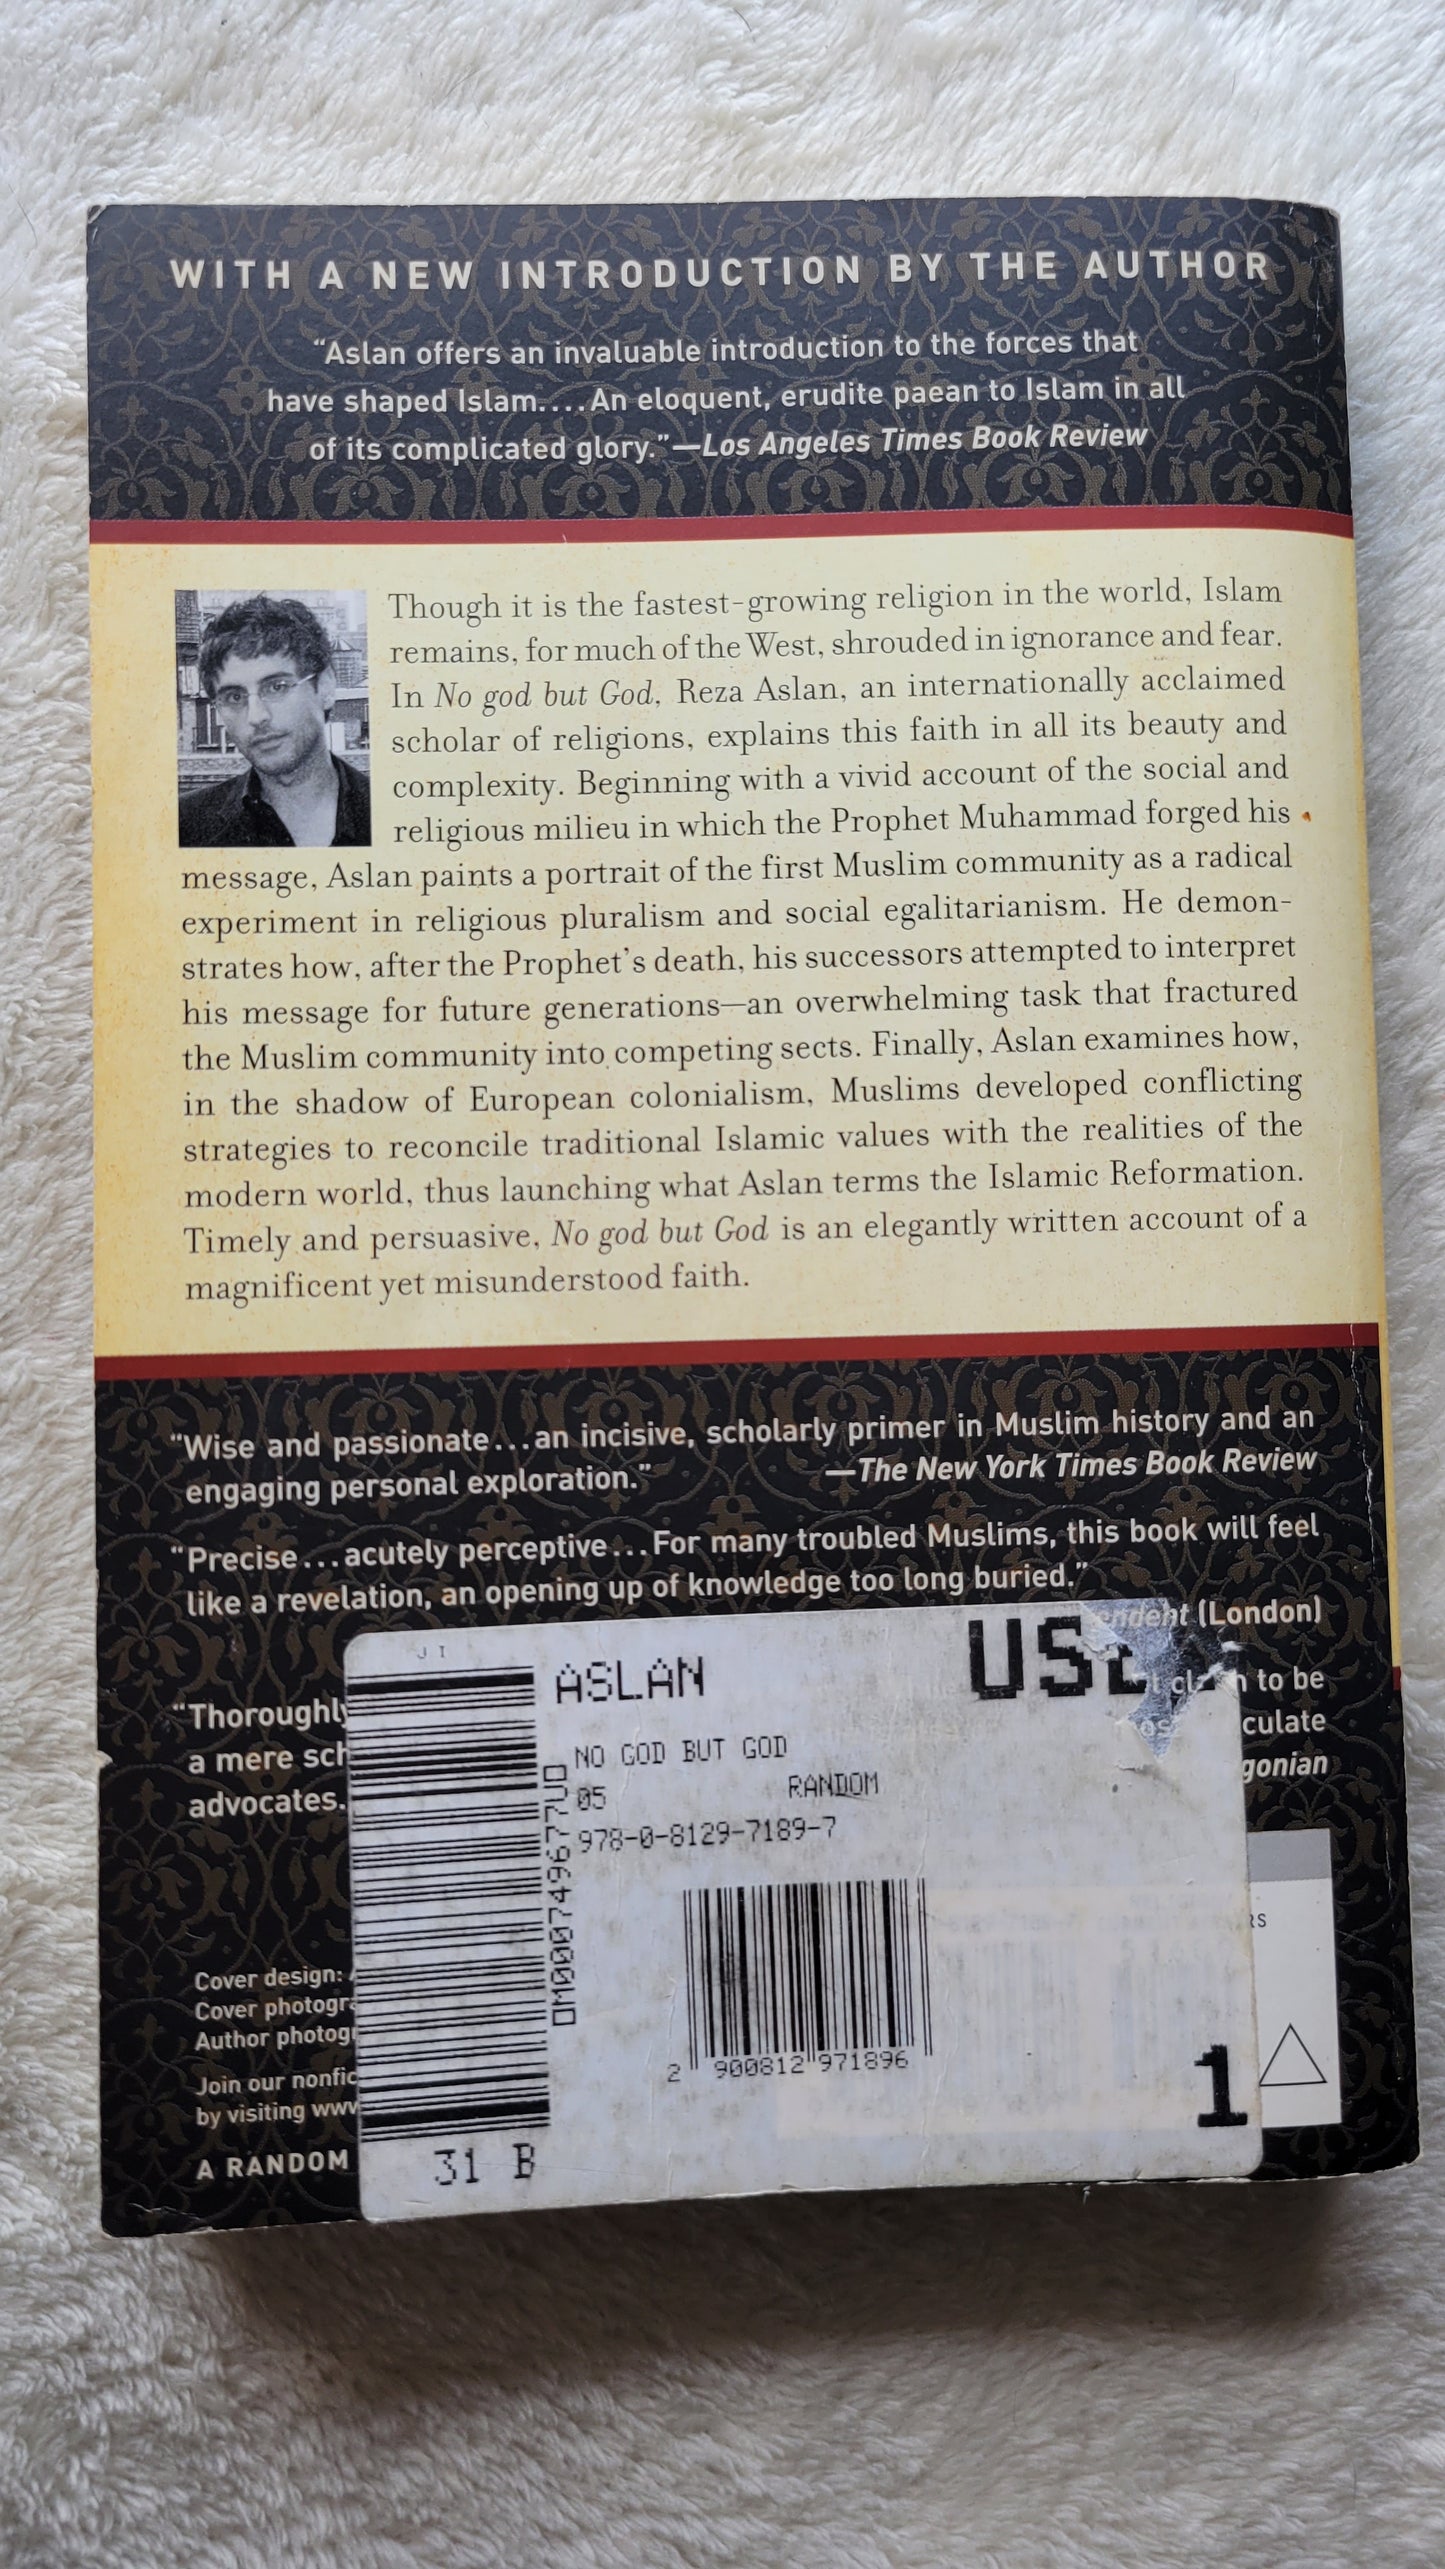 Used book for sale, "No god but God: The Origins, Evolution, and Future of Islam" by Reza Aslan, Random House publishers, 2006. View of back cover.